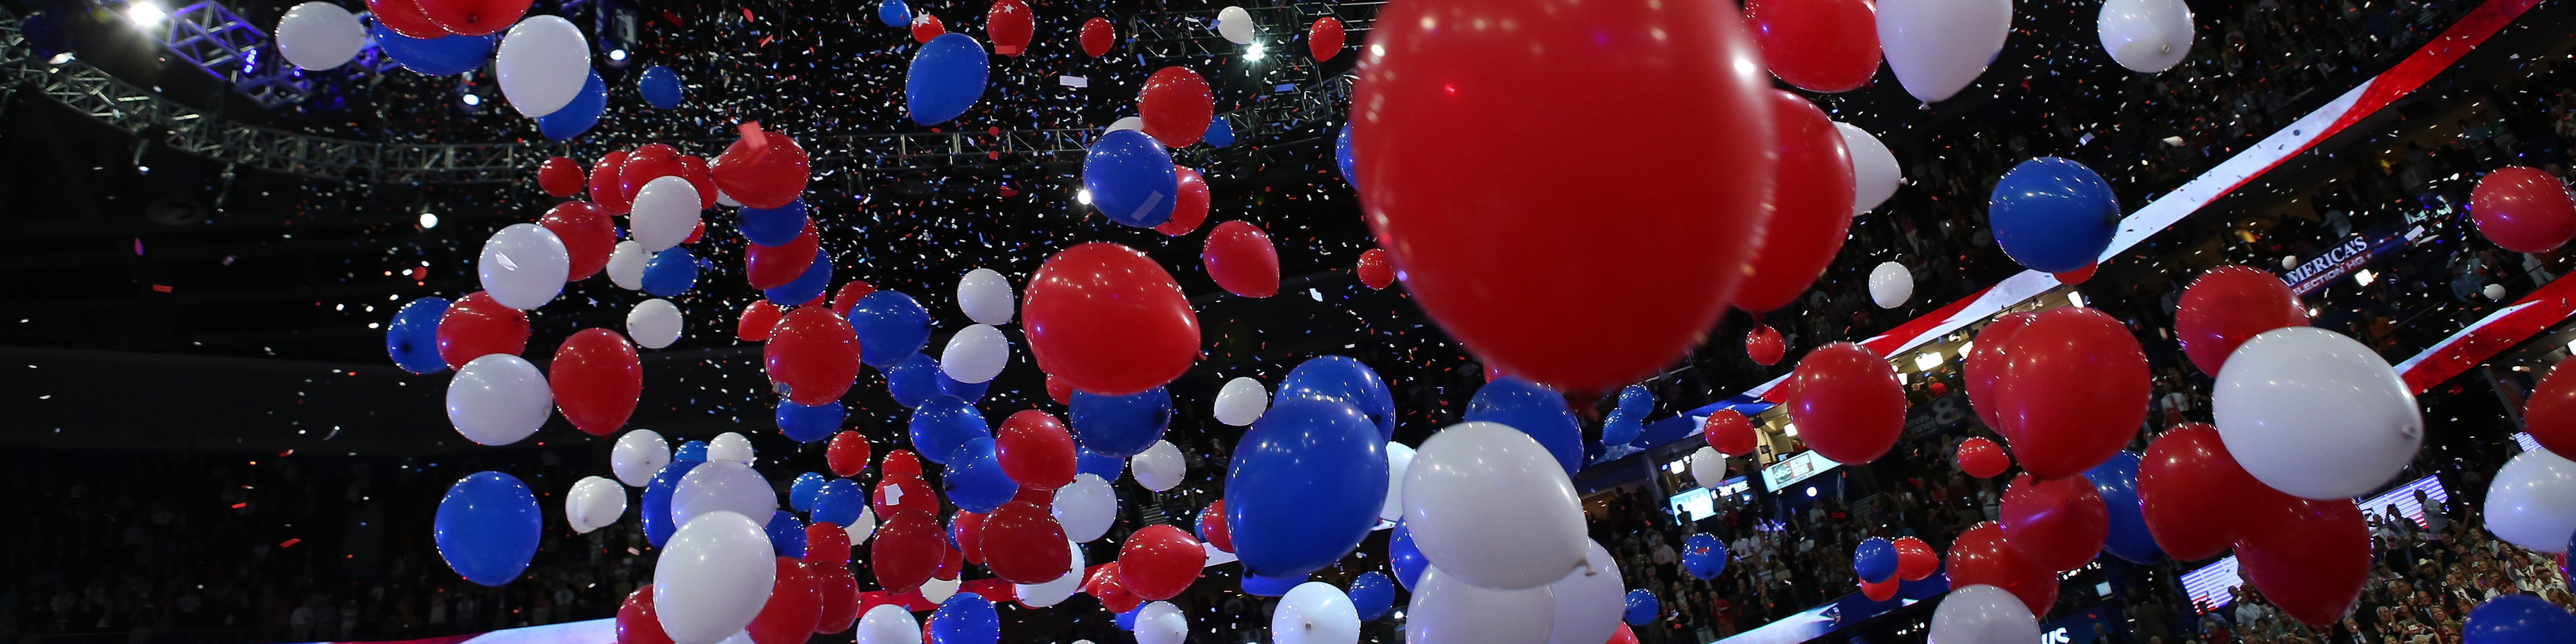 Photograph from a political convention showing red white and blue balloons falling from the ceiling of the arena